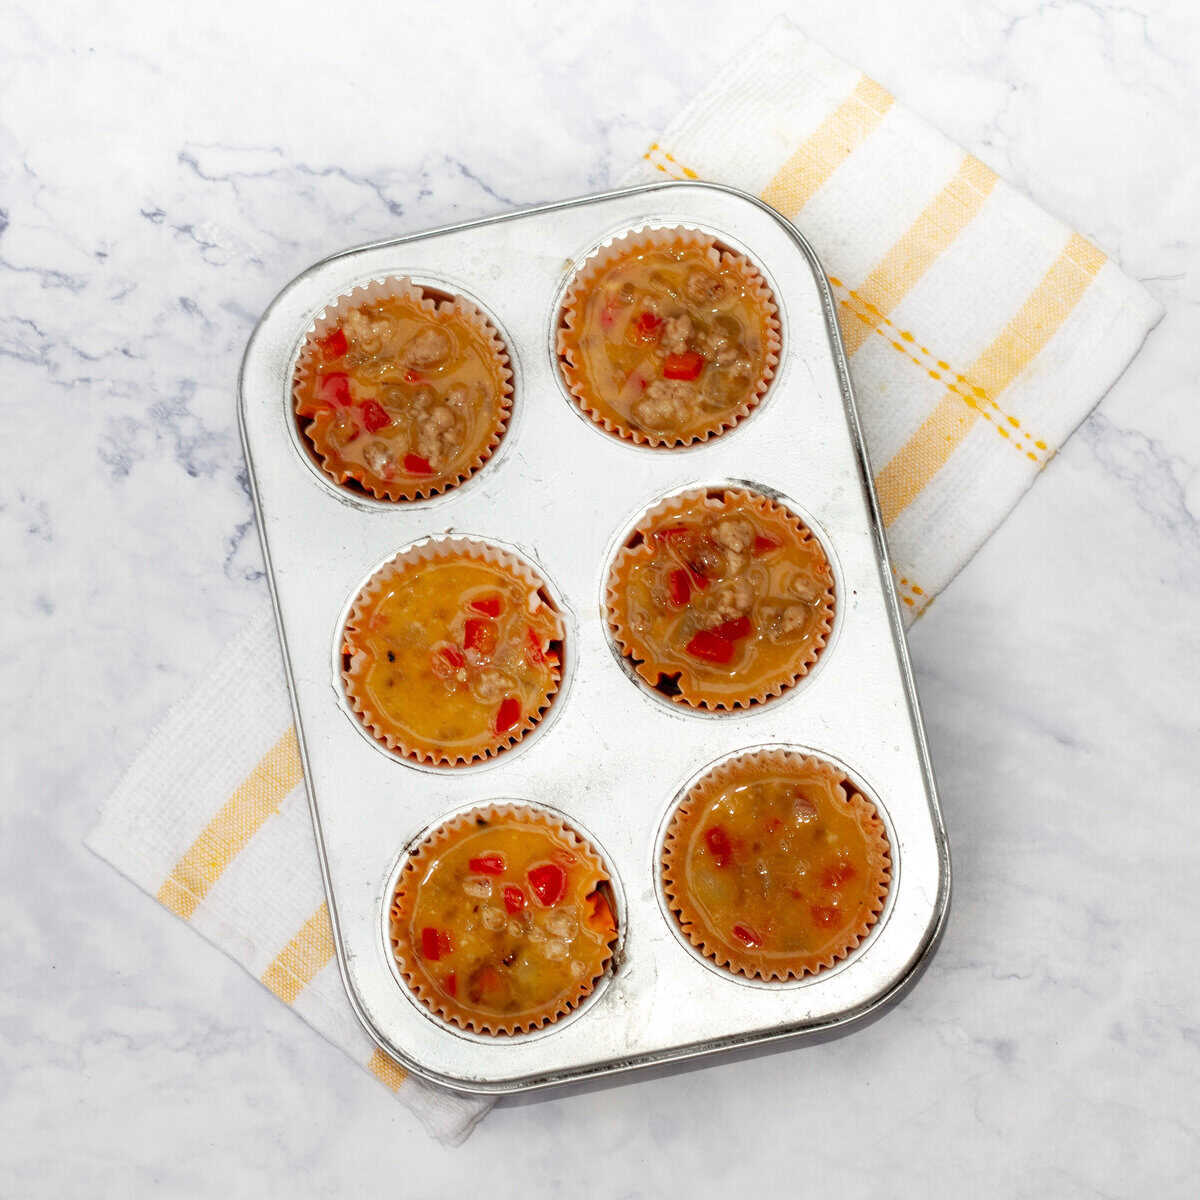 Pork eggs mixture added to muffin tin